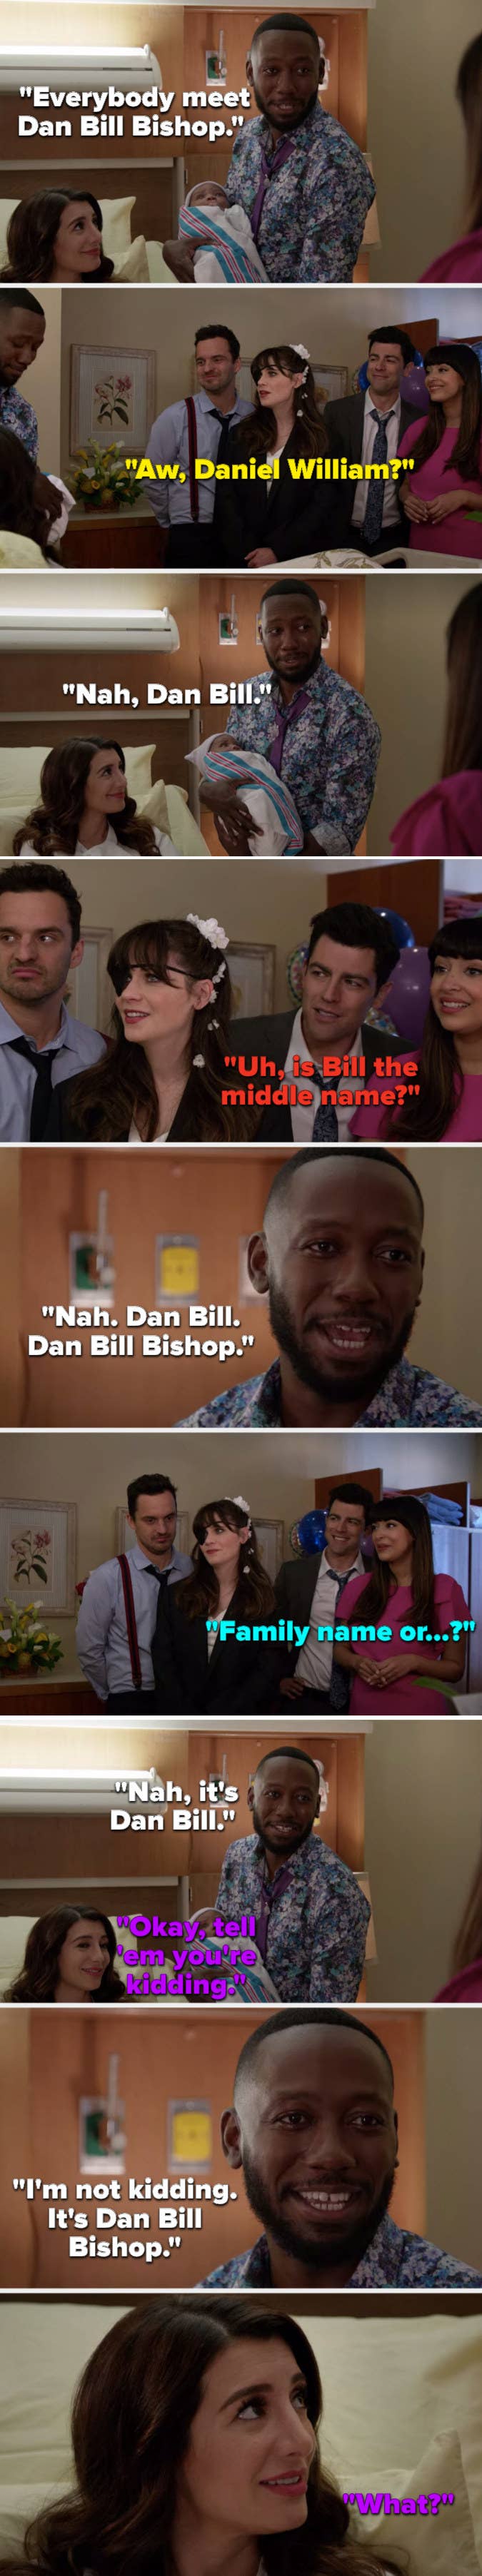 Winston says, Everybody meet Dan Bill Bishop, Jess asks, Daniel William, Winston says, No, Schmidt asks, Is Bill the middle name, Winston says, No, Aly says, Tell em you&#x27;re kidding, Winston says, I&#x27;m not kidding, it&#x27;s Dan Bill Bishop, and Aly asks, What